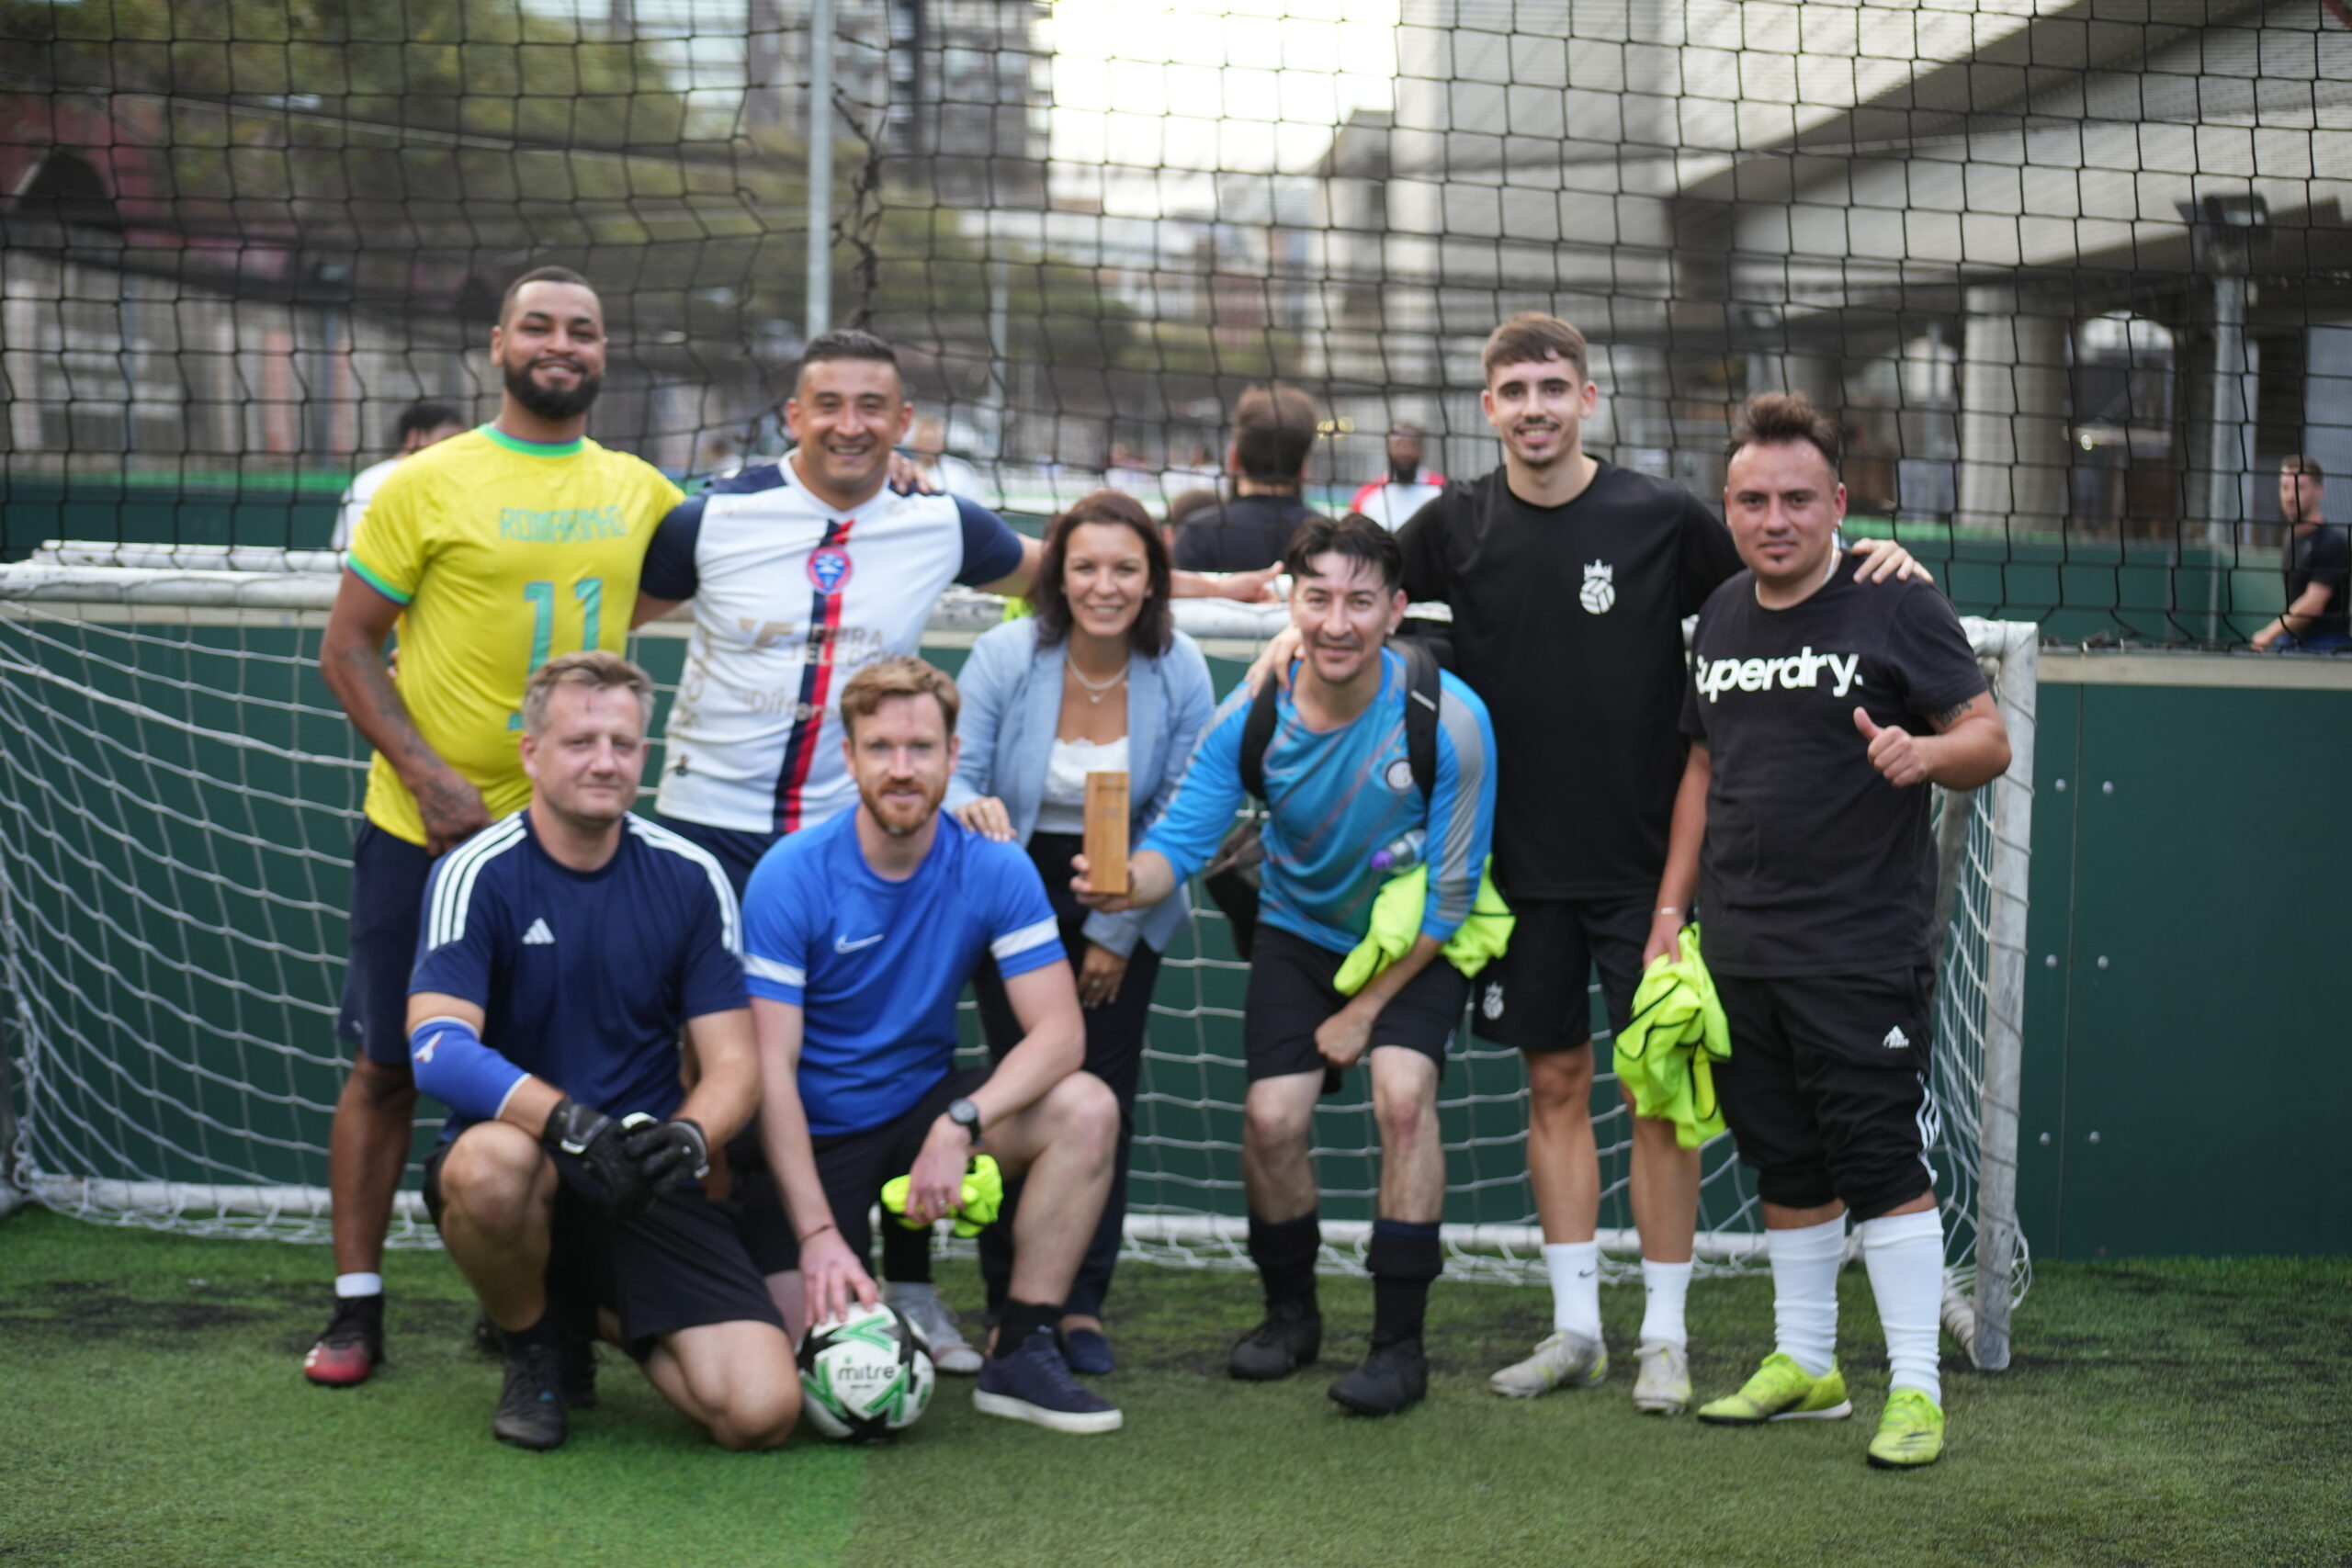 Vertical’s victory for second year in Principle’s 5-a-side tournament